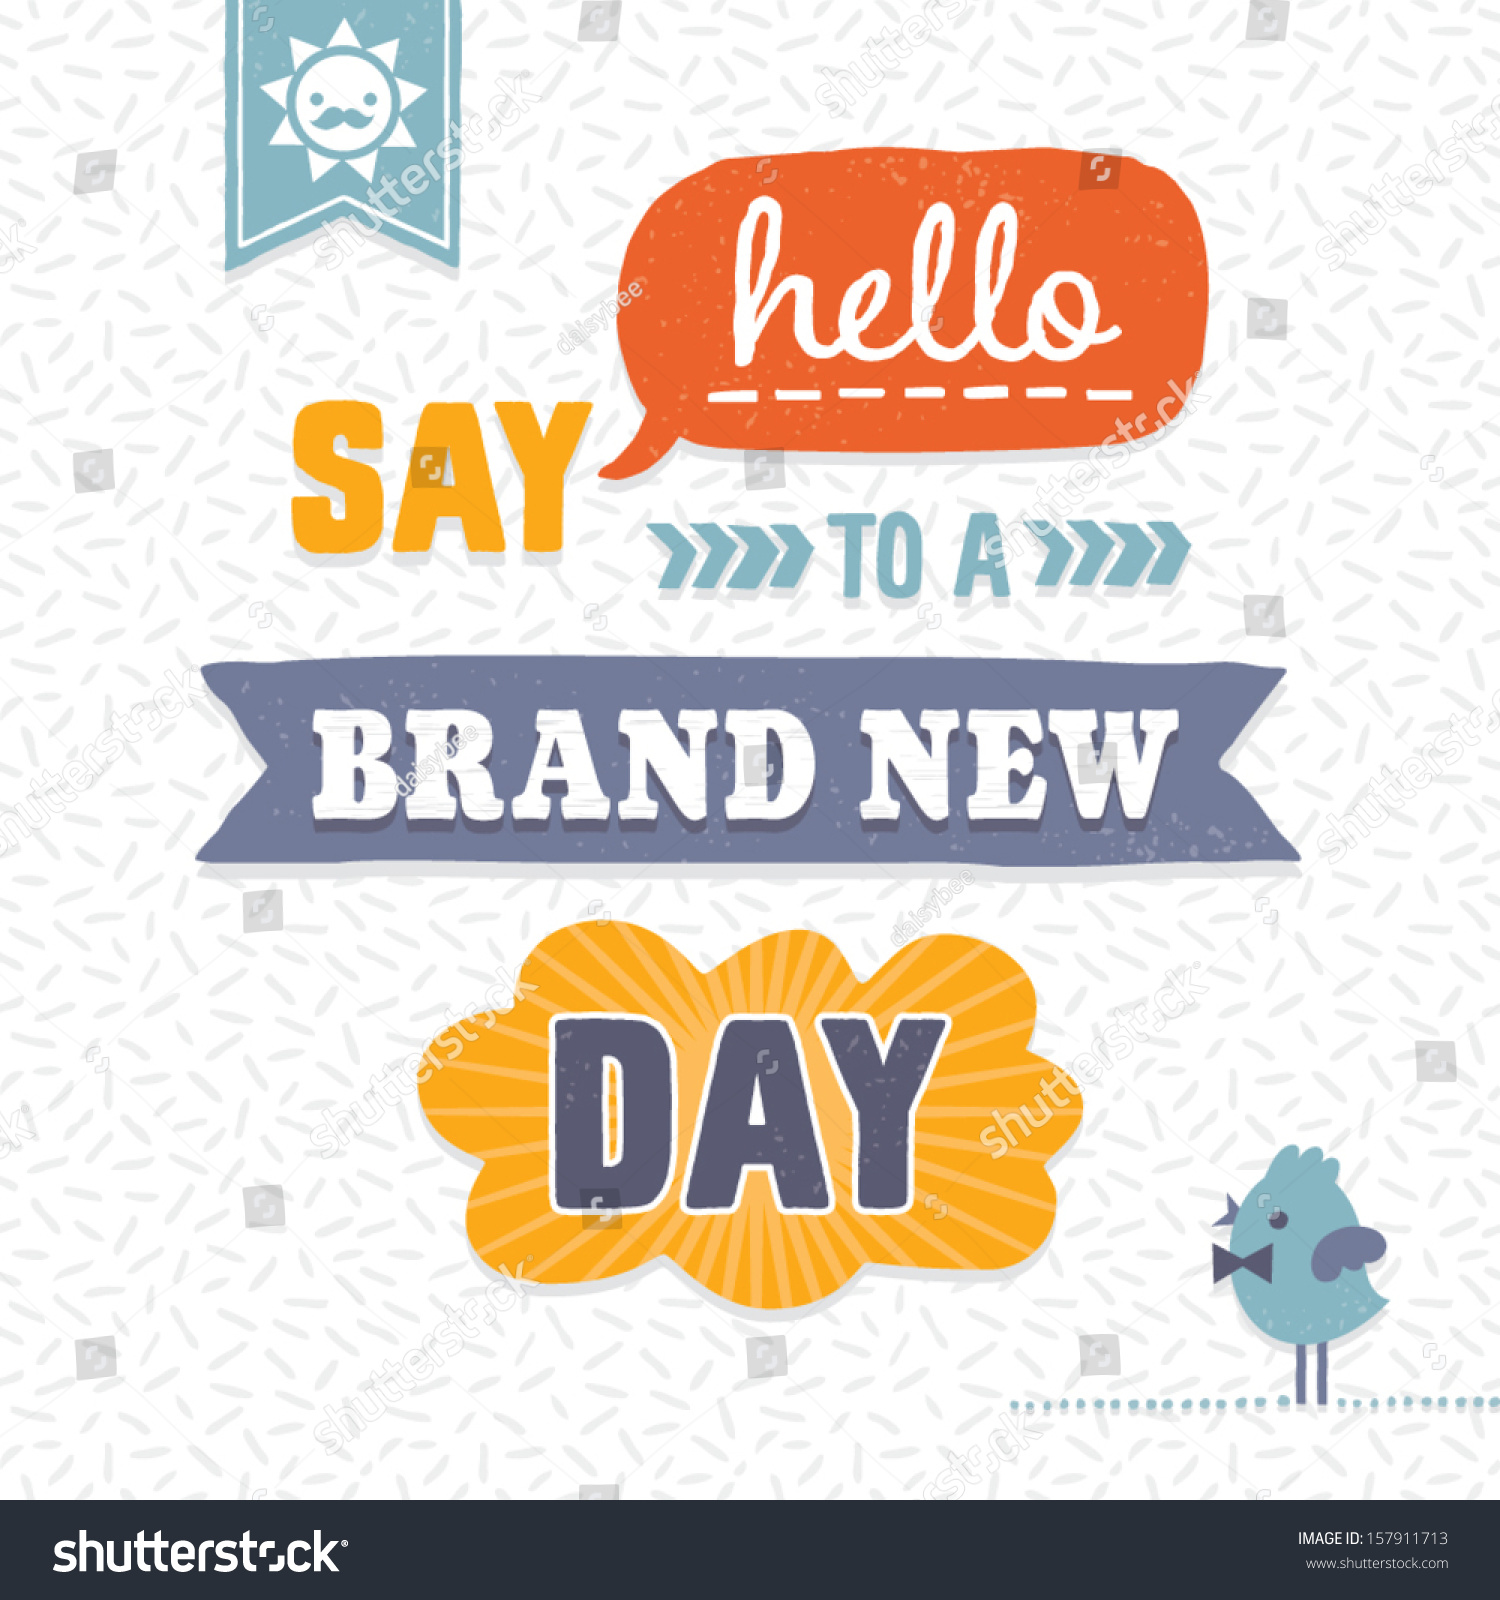 clipart of a new day - photo #1